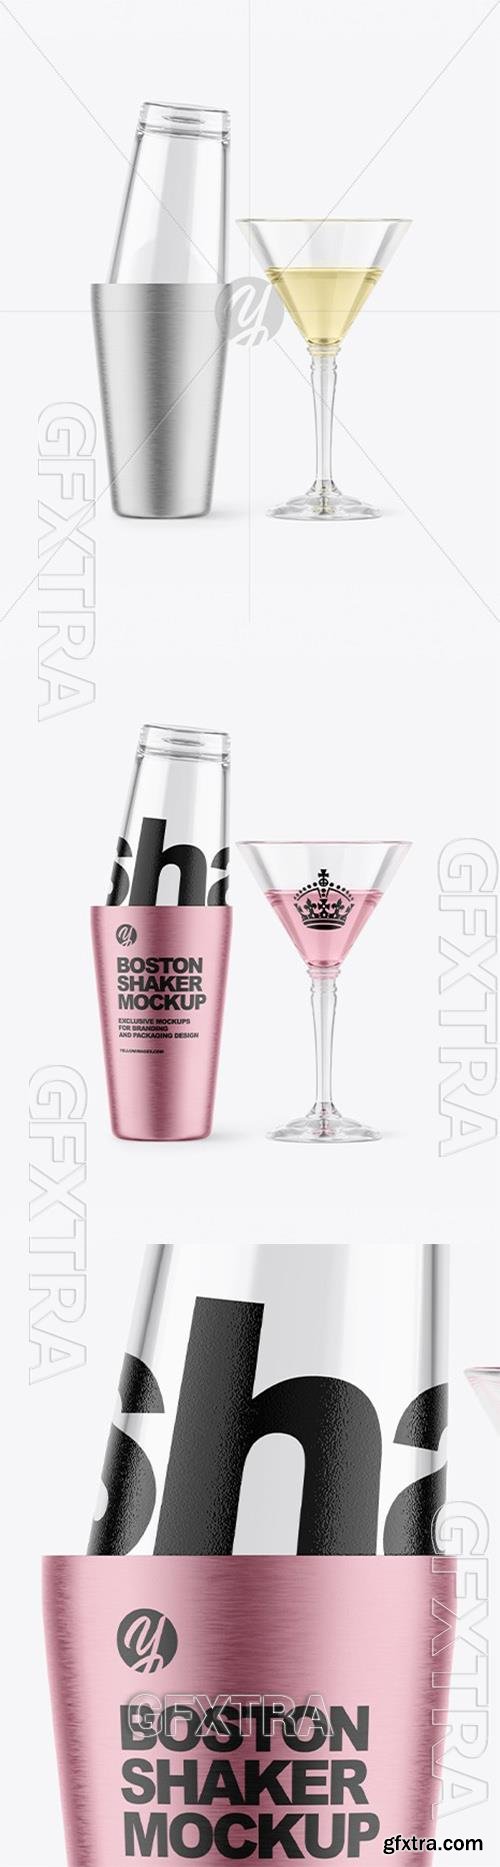 Boston Shaker Bottle With Cocktail Glass Mockup 94106